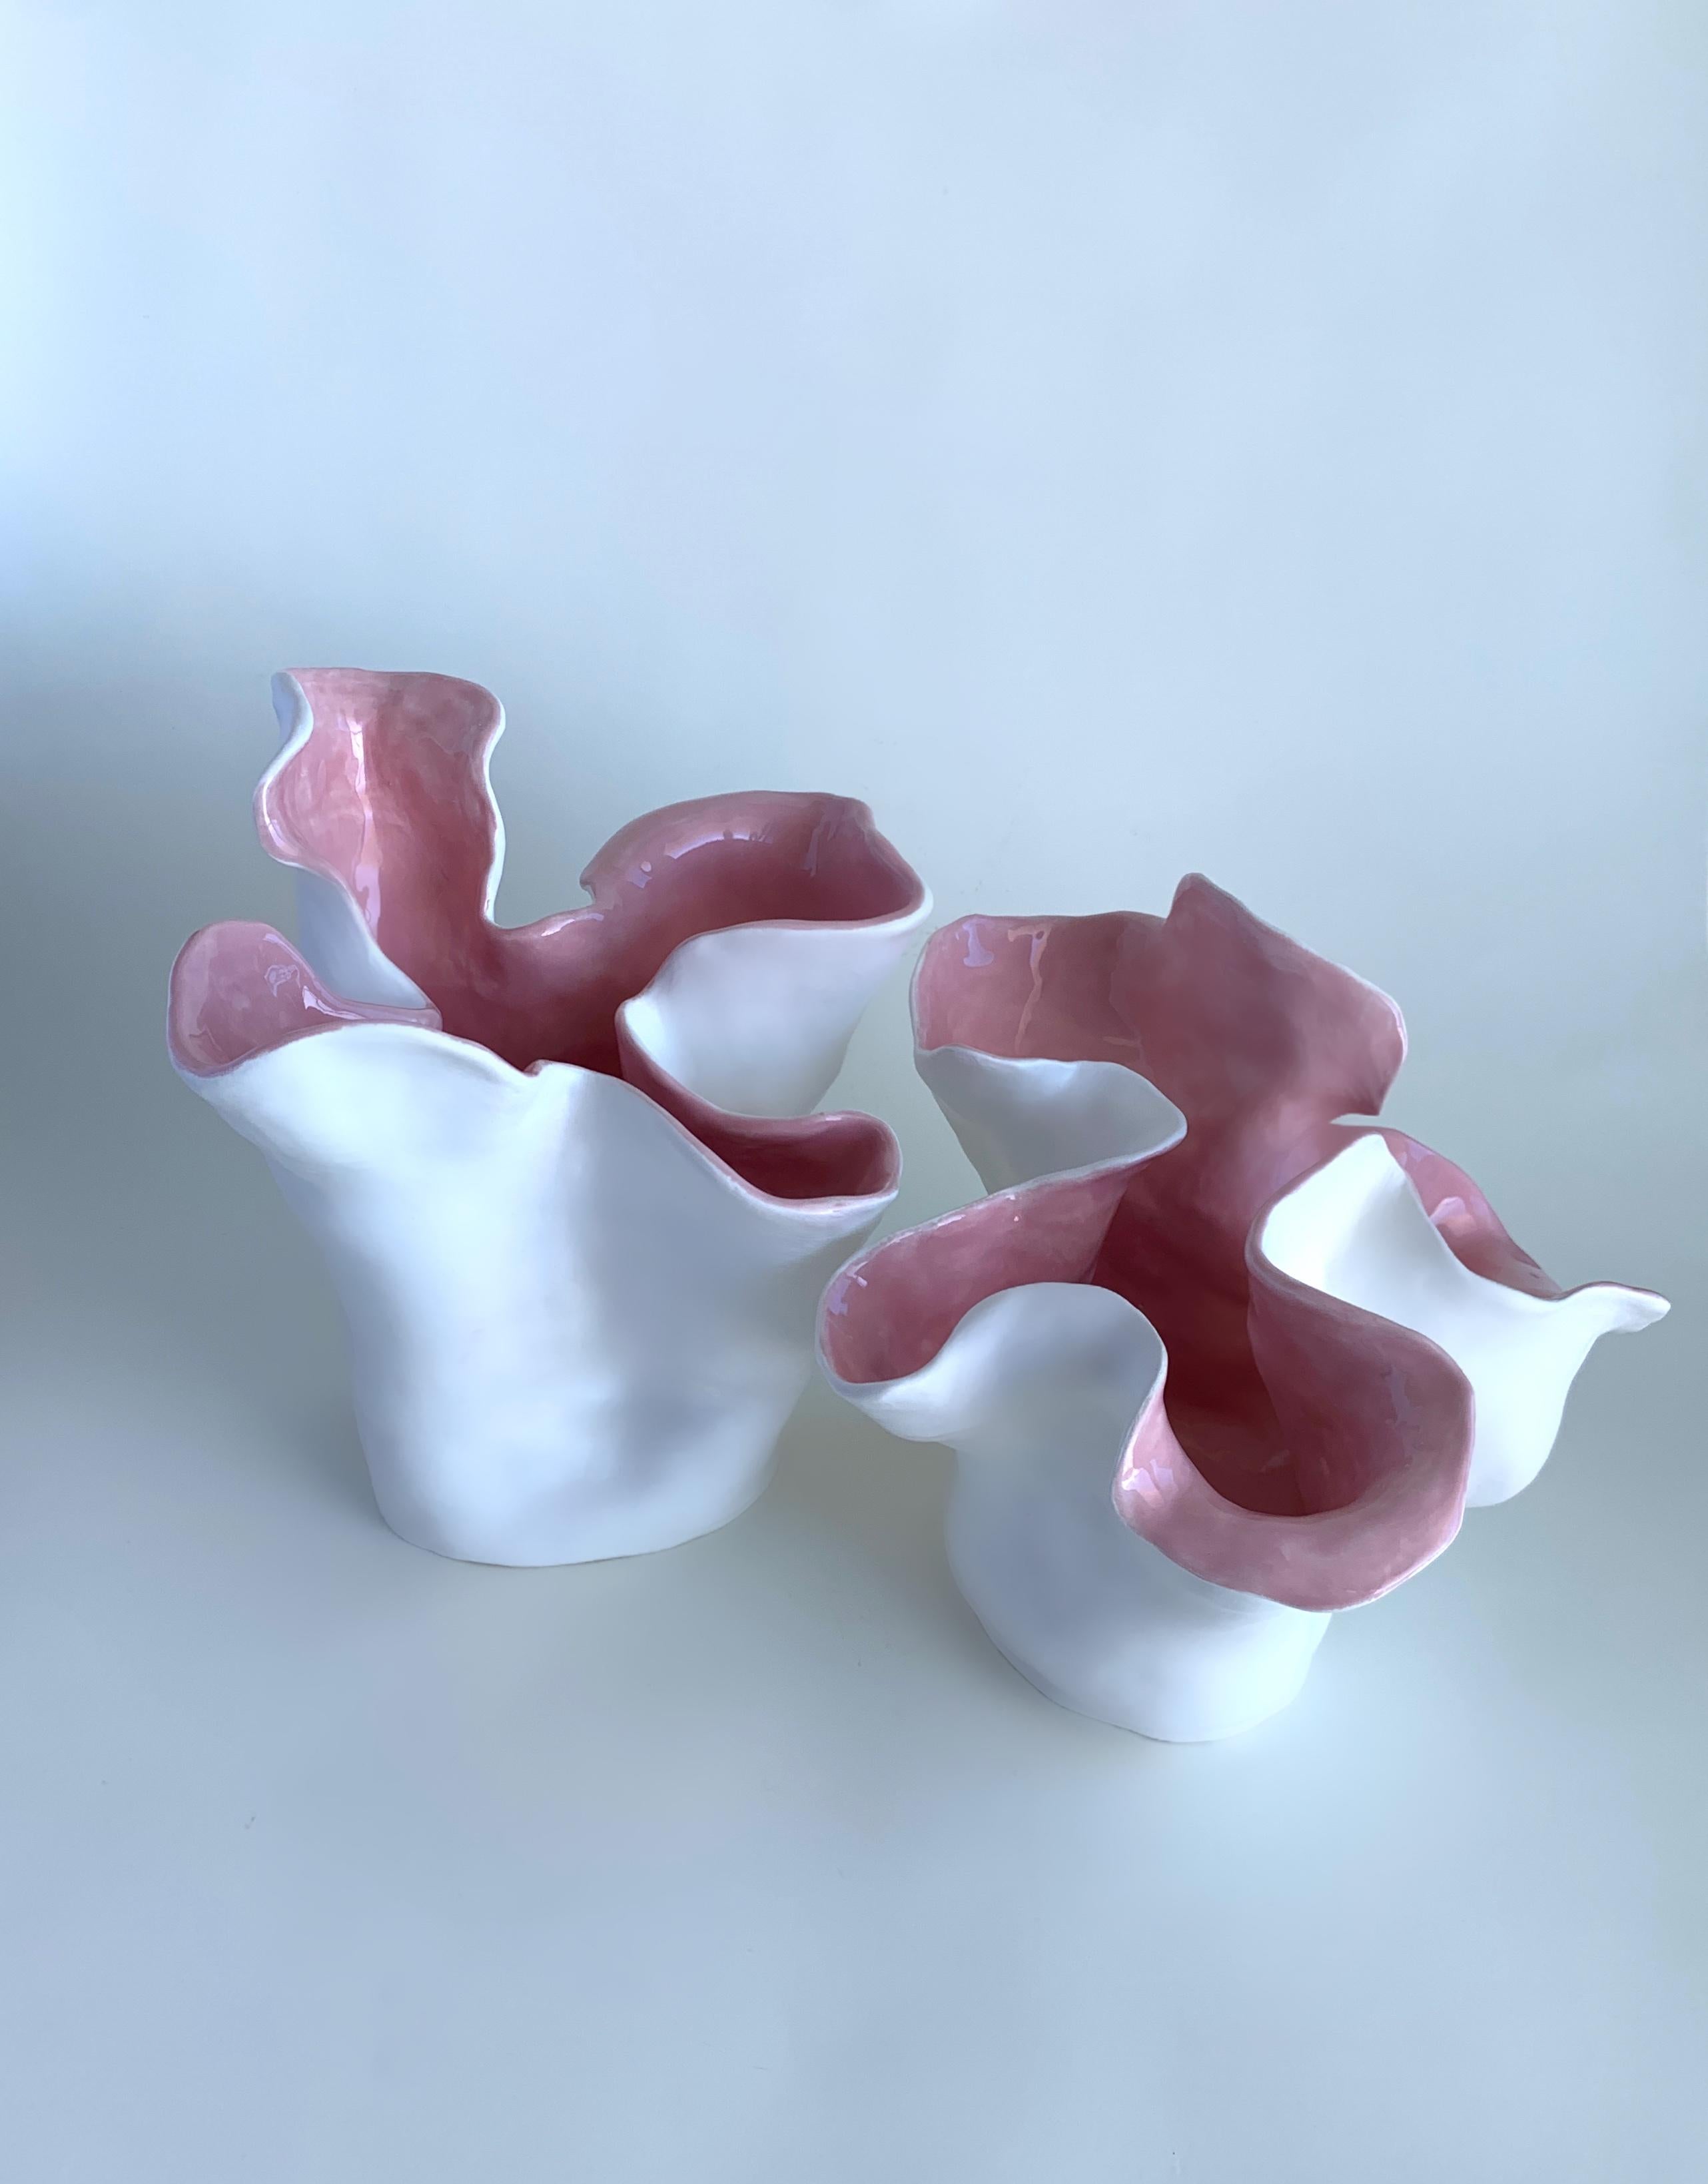 Set of Visceral Blush I and II, 2020 by Magda von Hanau
From The Visceral sculpture Series
Clay Sculpture with Glass Glaze
Dimensions: 12 H x 25 DM in. 

The Visceral series delves into the intricate relationship between the mind and the body,